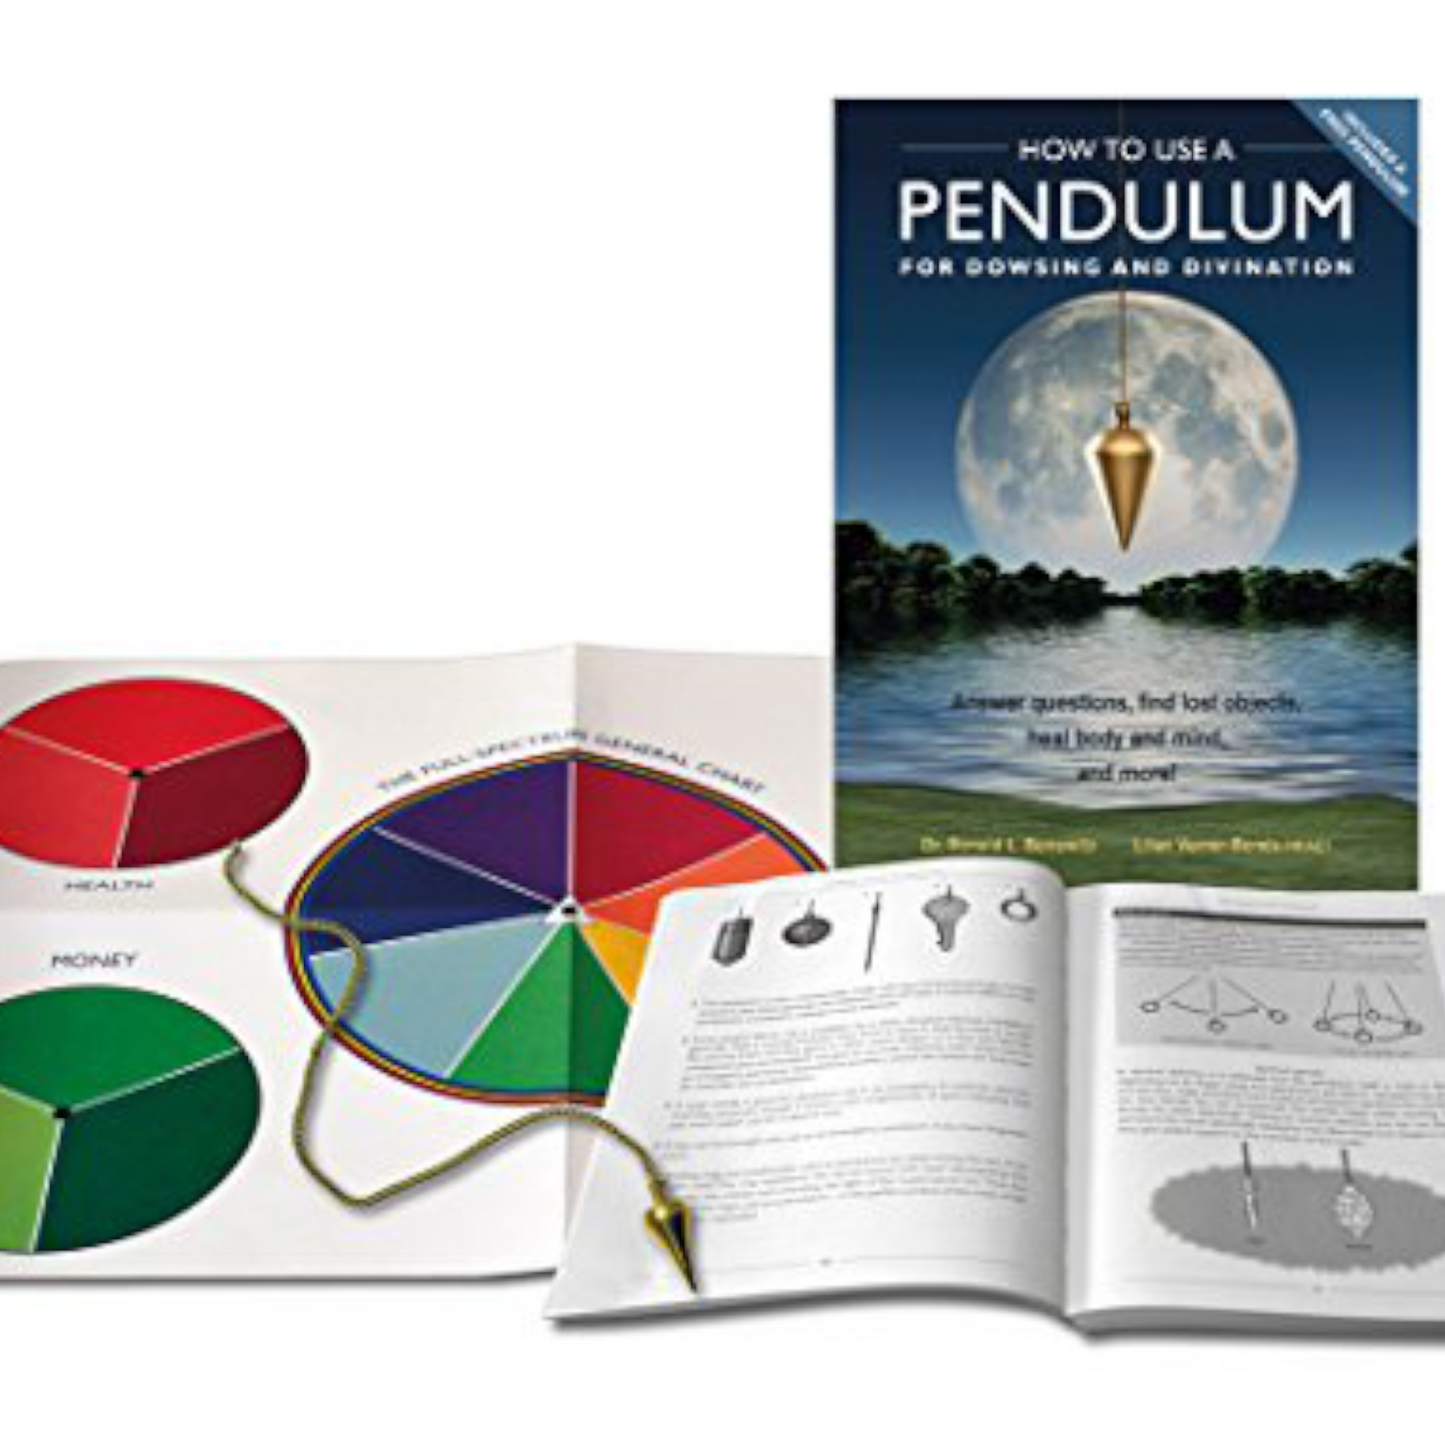 How To Use A Pendulum for Dowsing and Divination